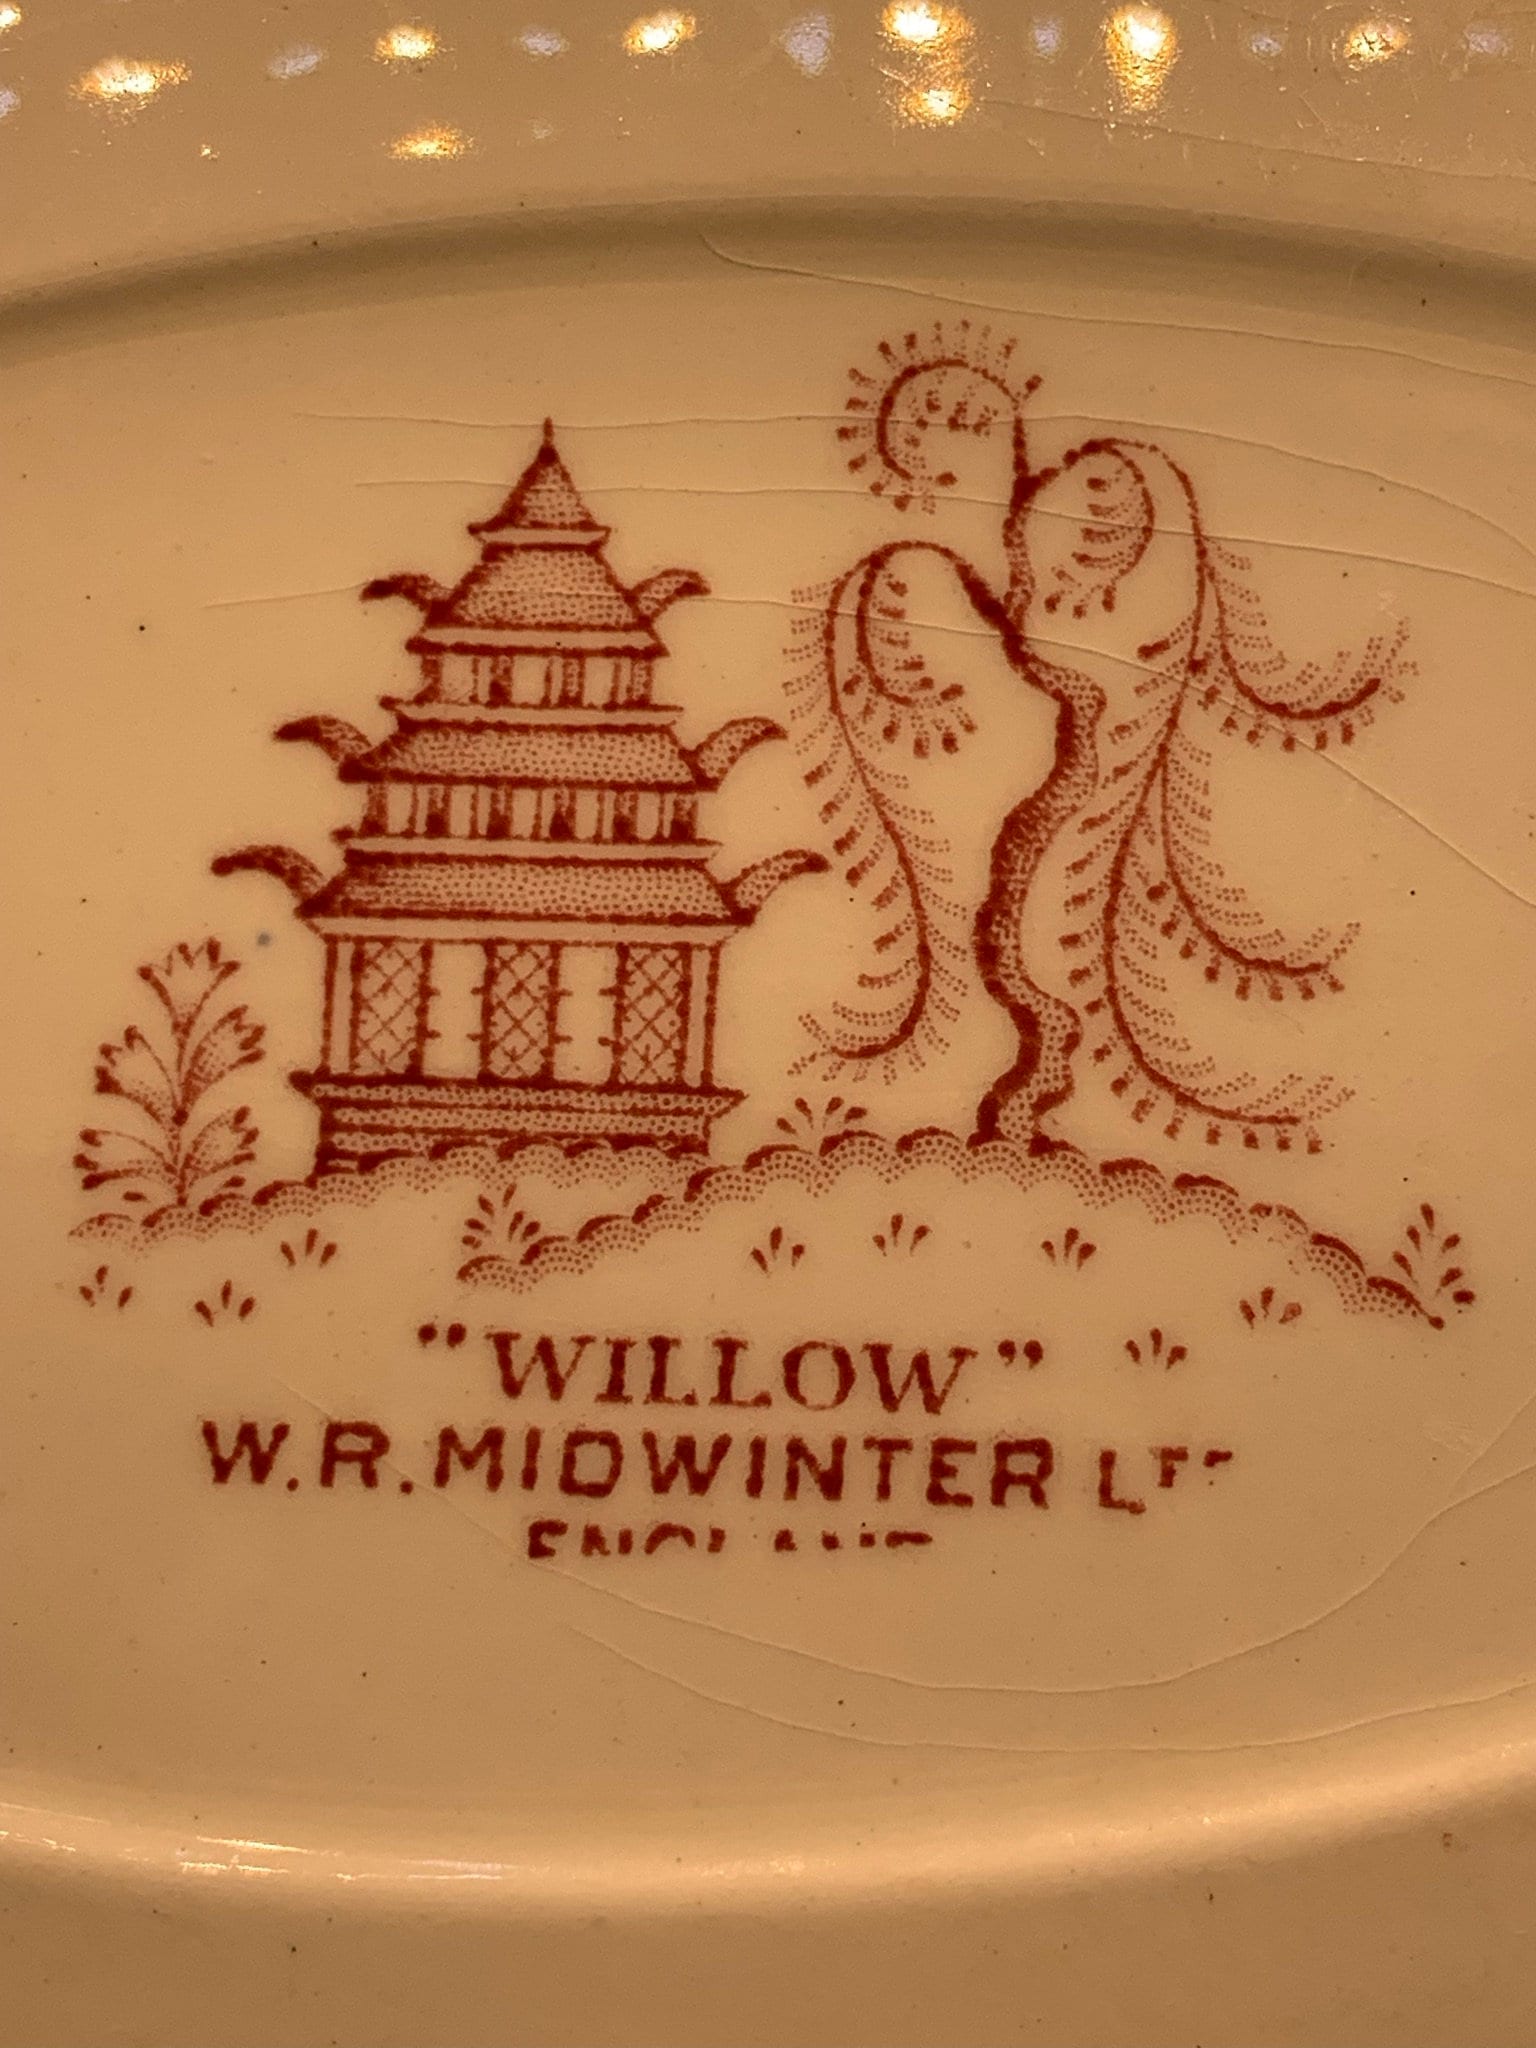 9 Oval Vegetable Bowl Great Size and Color! Red Willow by MIDWINTER LTD